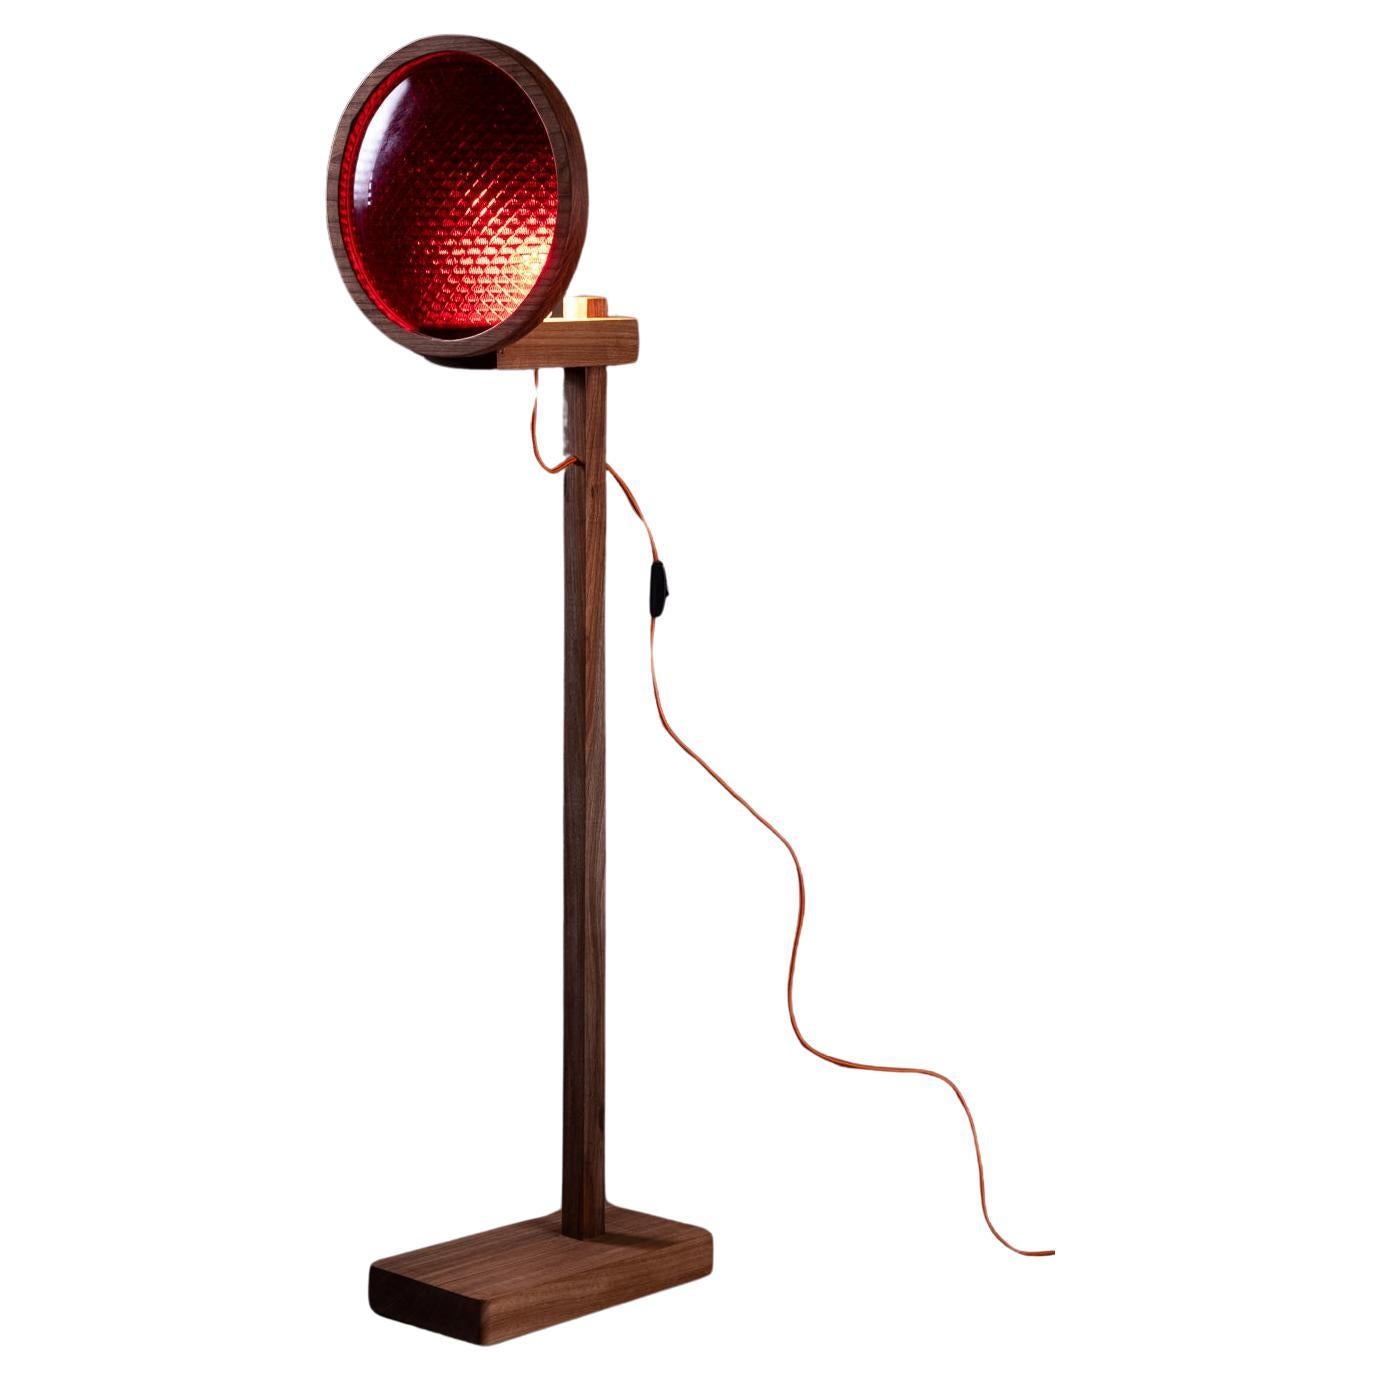 The Lore Lamp. Brazilian Solid Wood and 1960s traffic signal lenses.